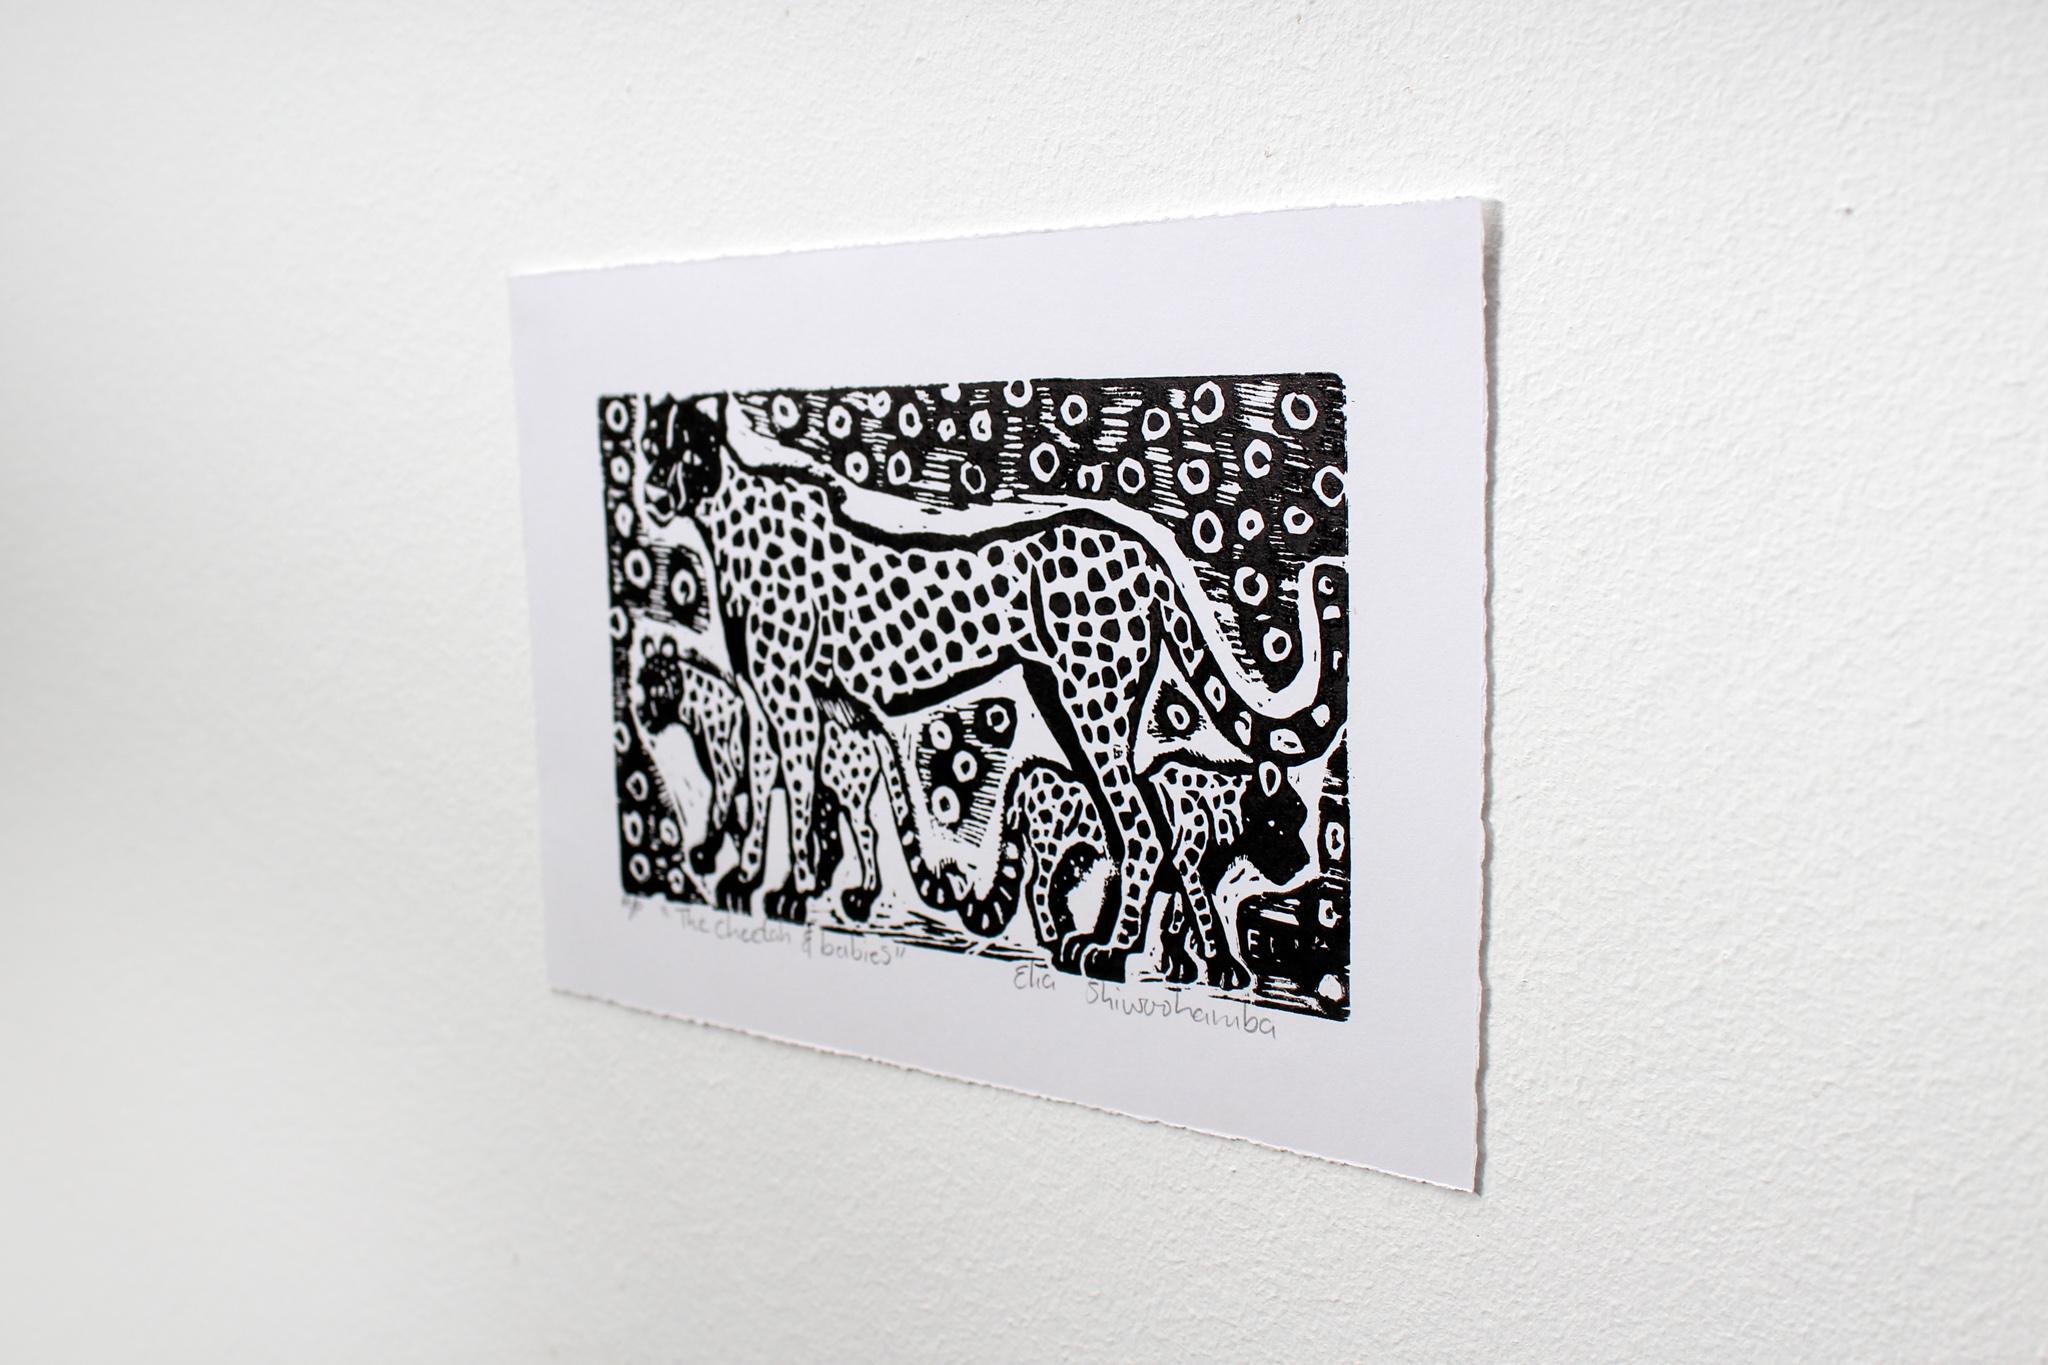 The cheetah and babies, Linoleum block prints on paper.

Elia Shiwoohamba was born in 1981 in Windhoek, Namibia. He graduated from the John Muafangejo Art Centre in Windhoek in 2006. Specialising in printmaking and sculpture, Shiwoohamba works as a